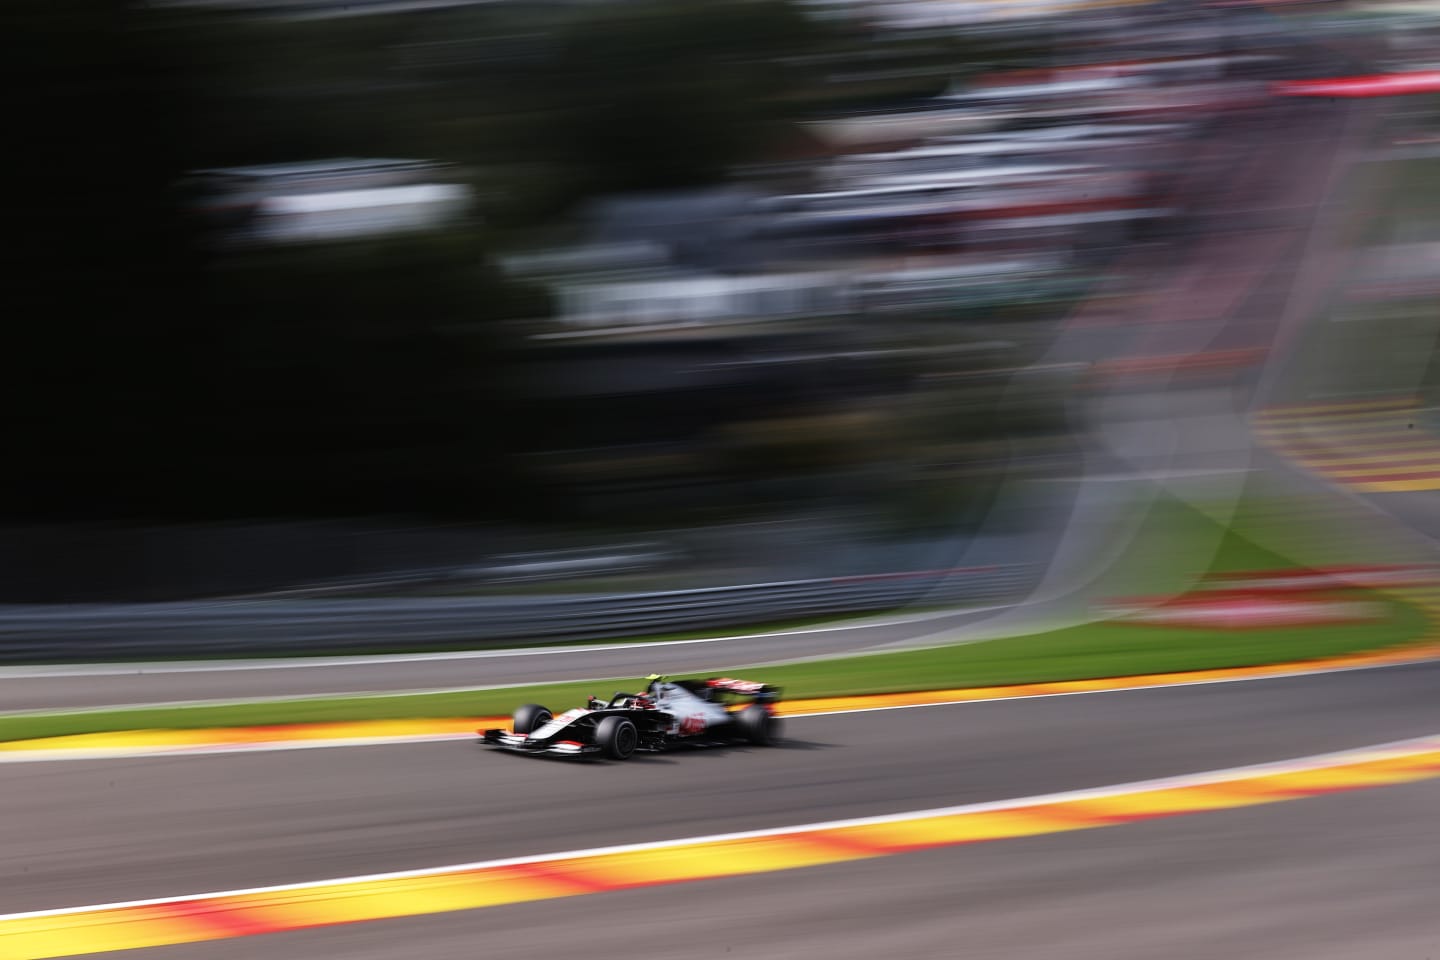 SPA, BELGIUM - AUGUST 30: Kevin Magnussen of Denmark driving the (20) Haas F1 Team VF-20 Ferrari on track during the F1 Grand Prix of Belgium at Circuit de Spa-Francorchamps on August 30, 2020 in Spa, Belgium. (Photo by Lars Baron/Getty Images)